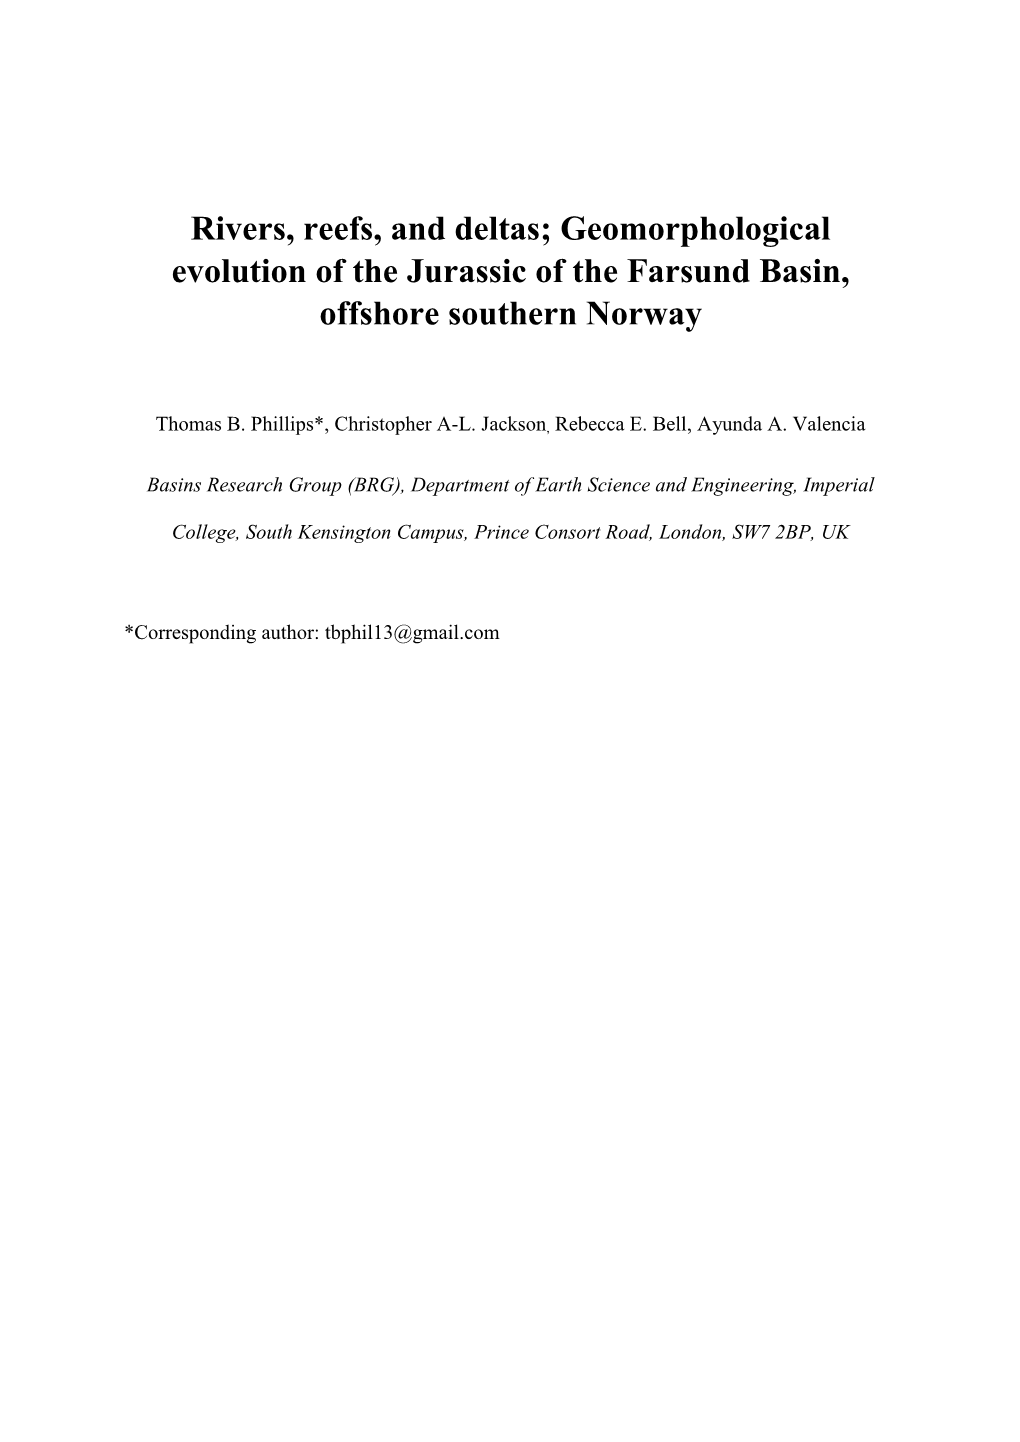 Rivers, Reefs, and Deltas; Geomorphological Evolution of the Jurassic of the Farsund Basin, Offshore Southern Norway